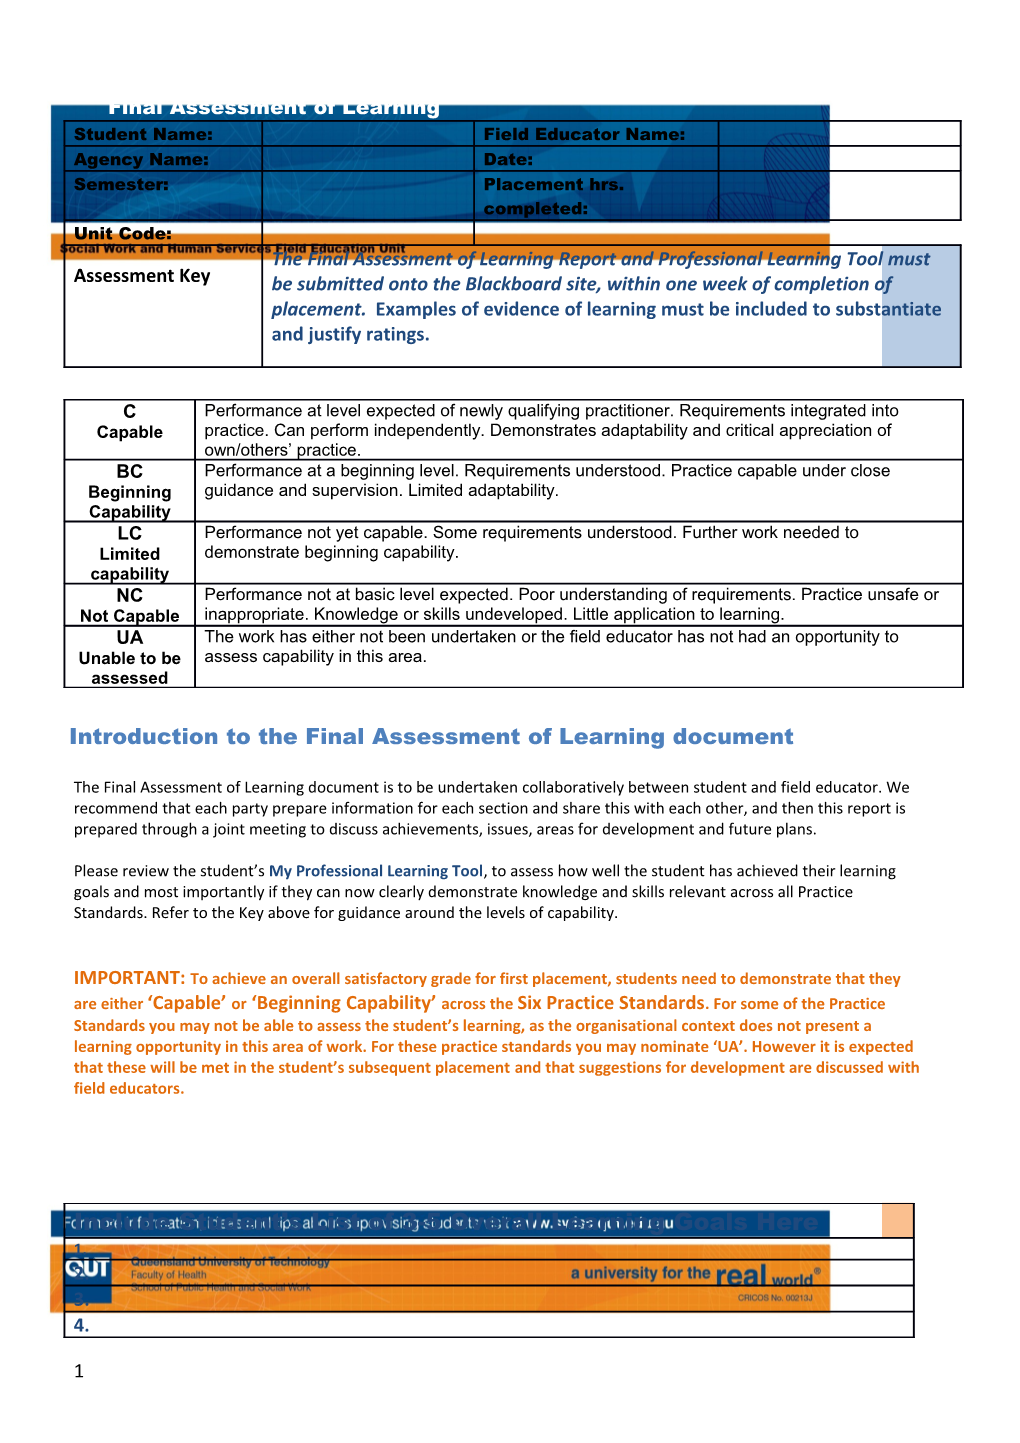 Introduction to the Final Assessment of Learning Document